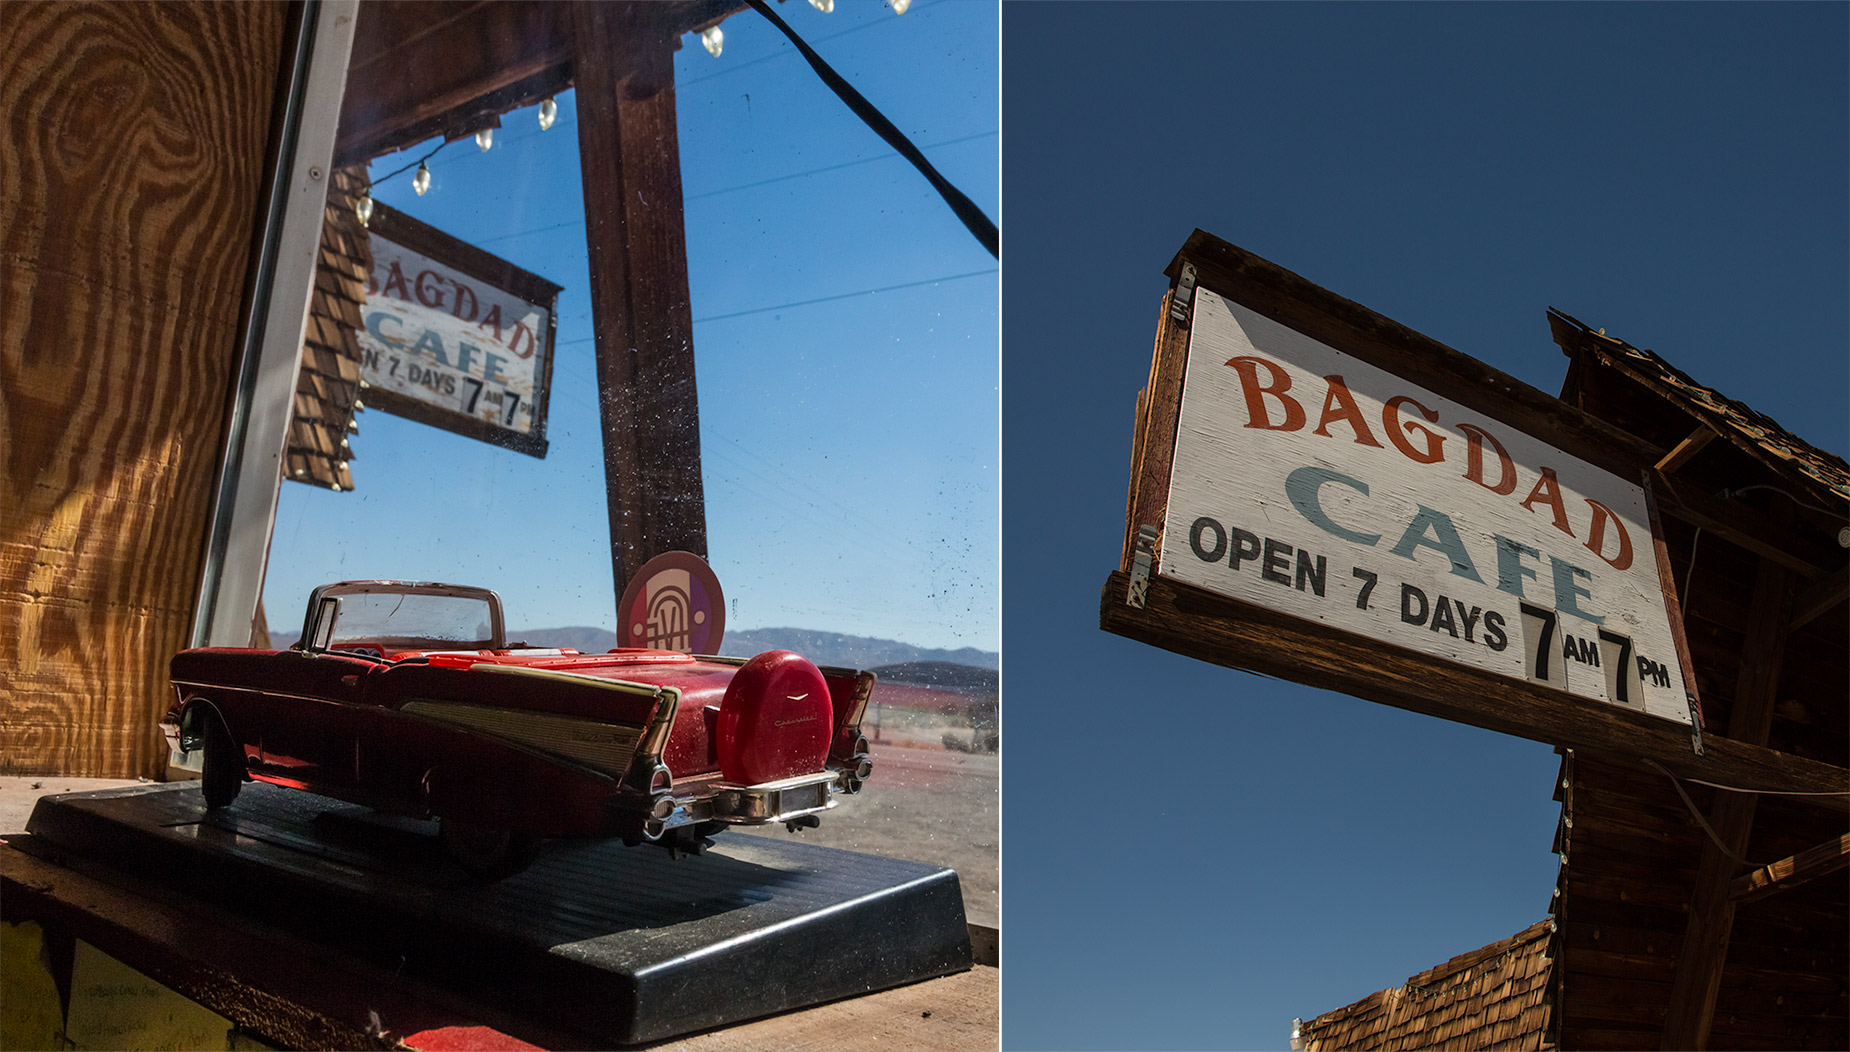 Bagdad Cafe on the Route 66